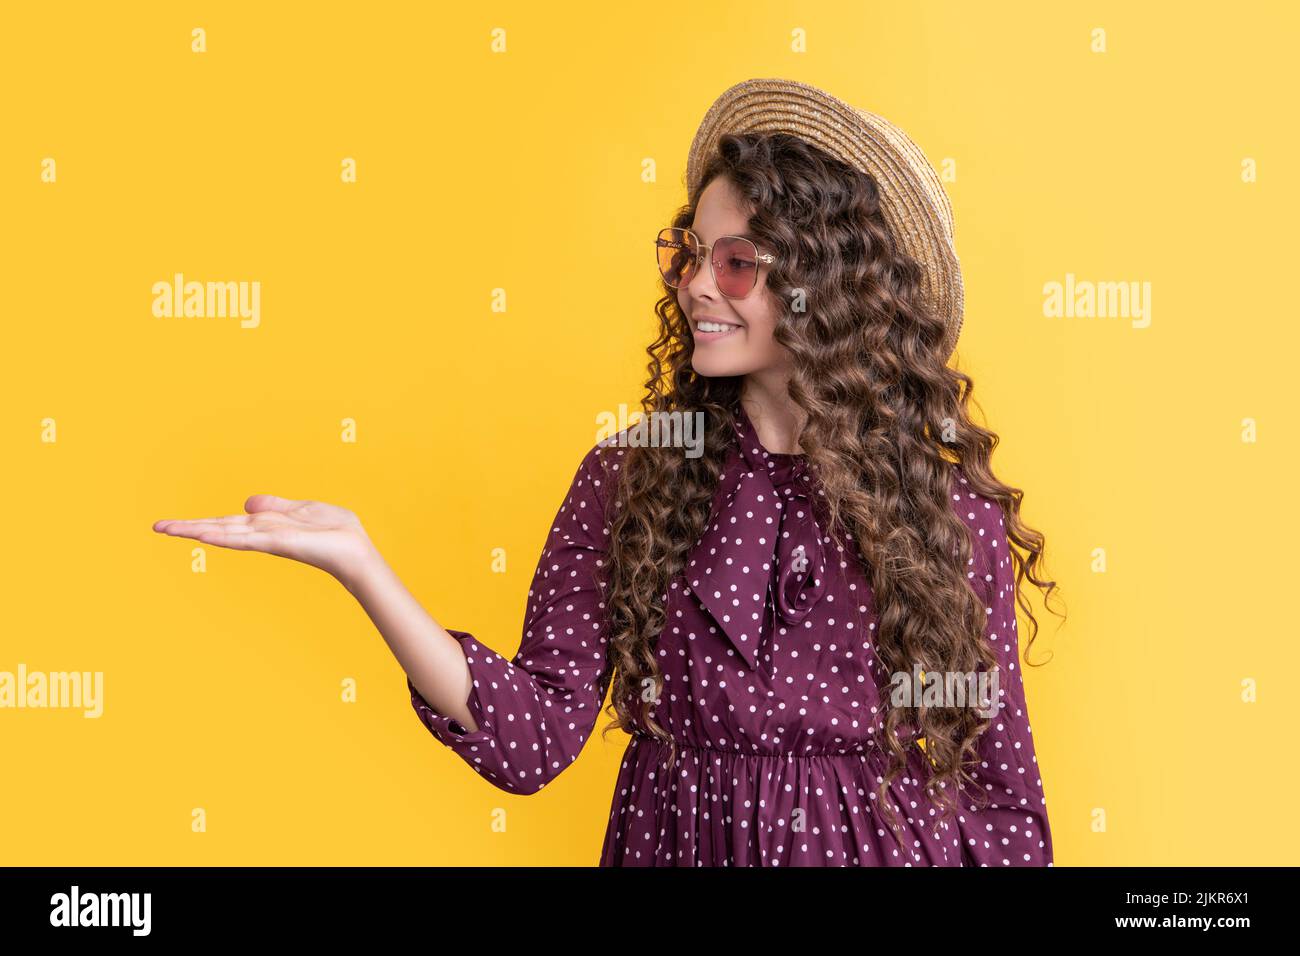 smiling girl in straw hat and sunglasses with long brunette curly hair on yellow background Stock Photo